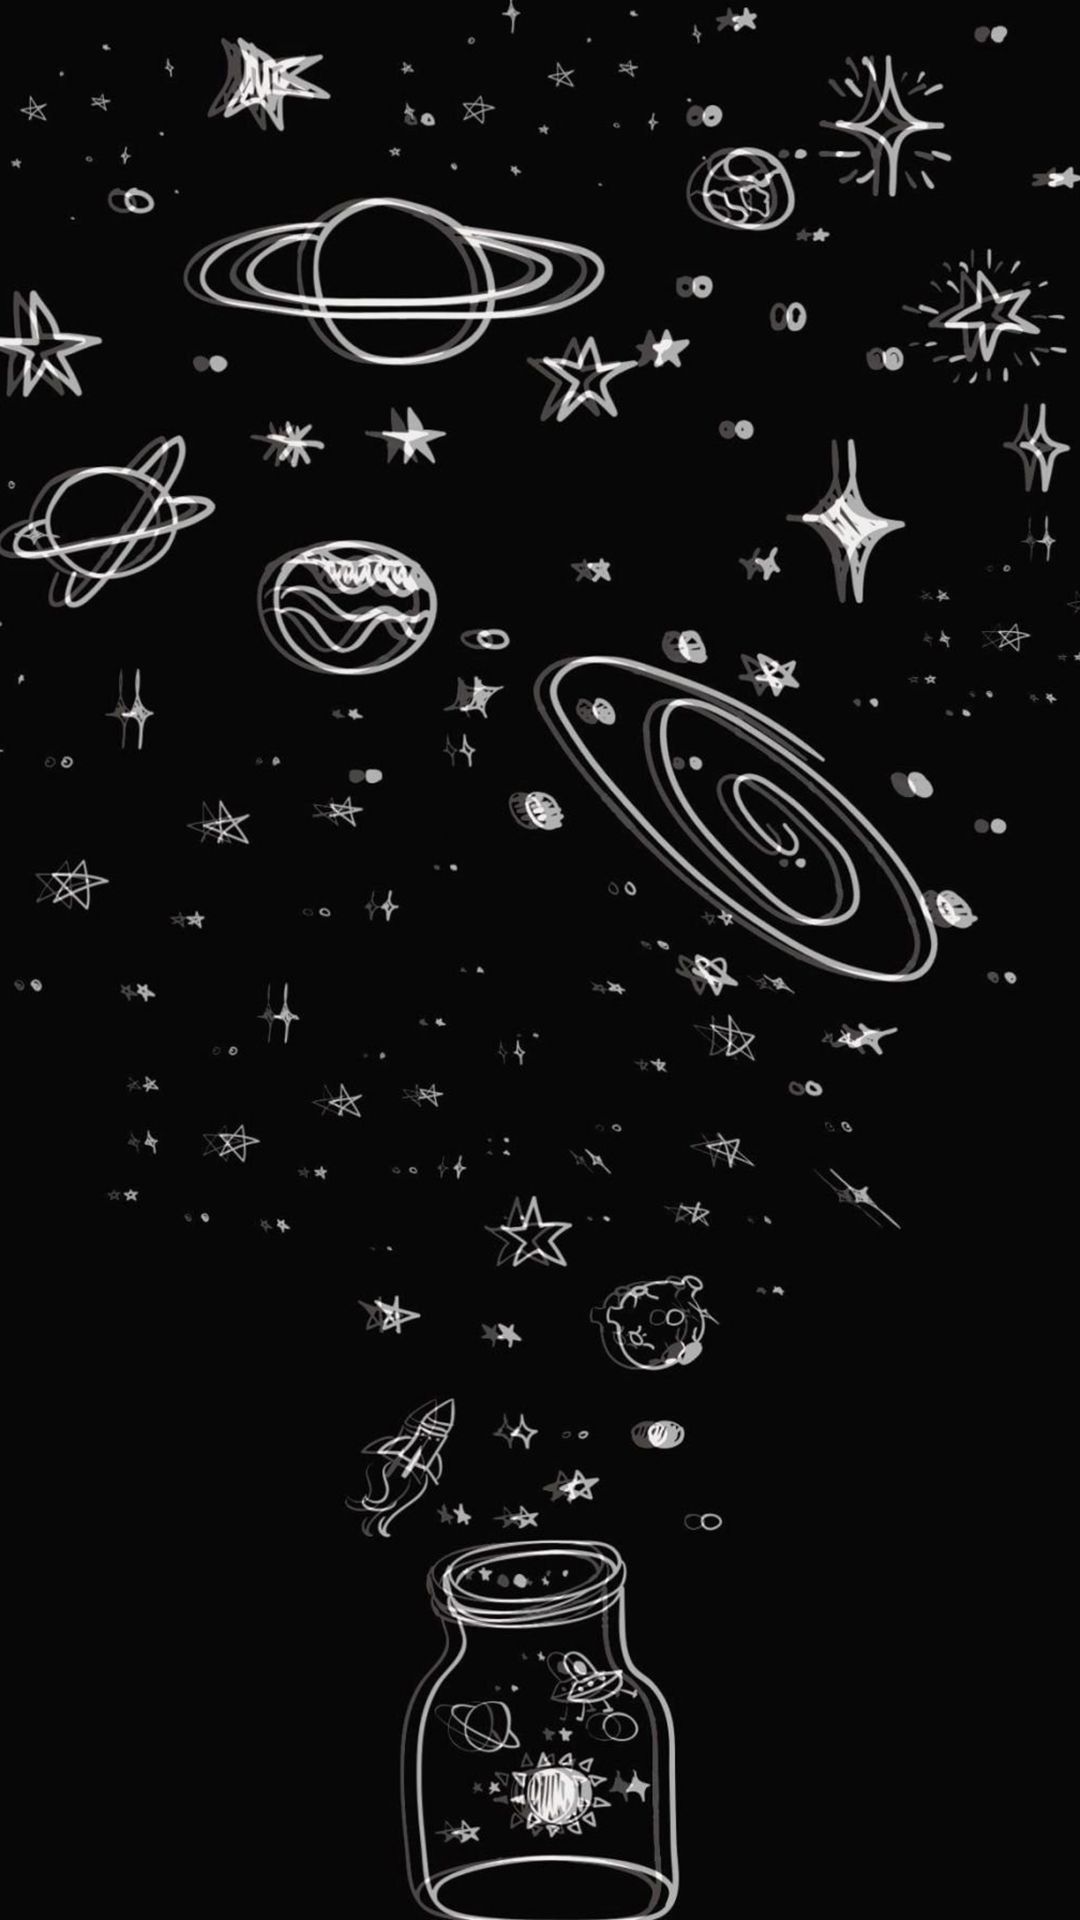 Black aesthetic wallpaper for phone with stars, planets, and a jar - Black phone, black glitch, beautiful, doodles, space